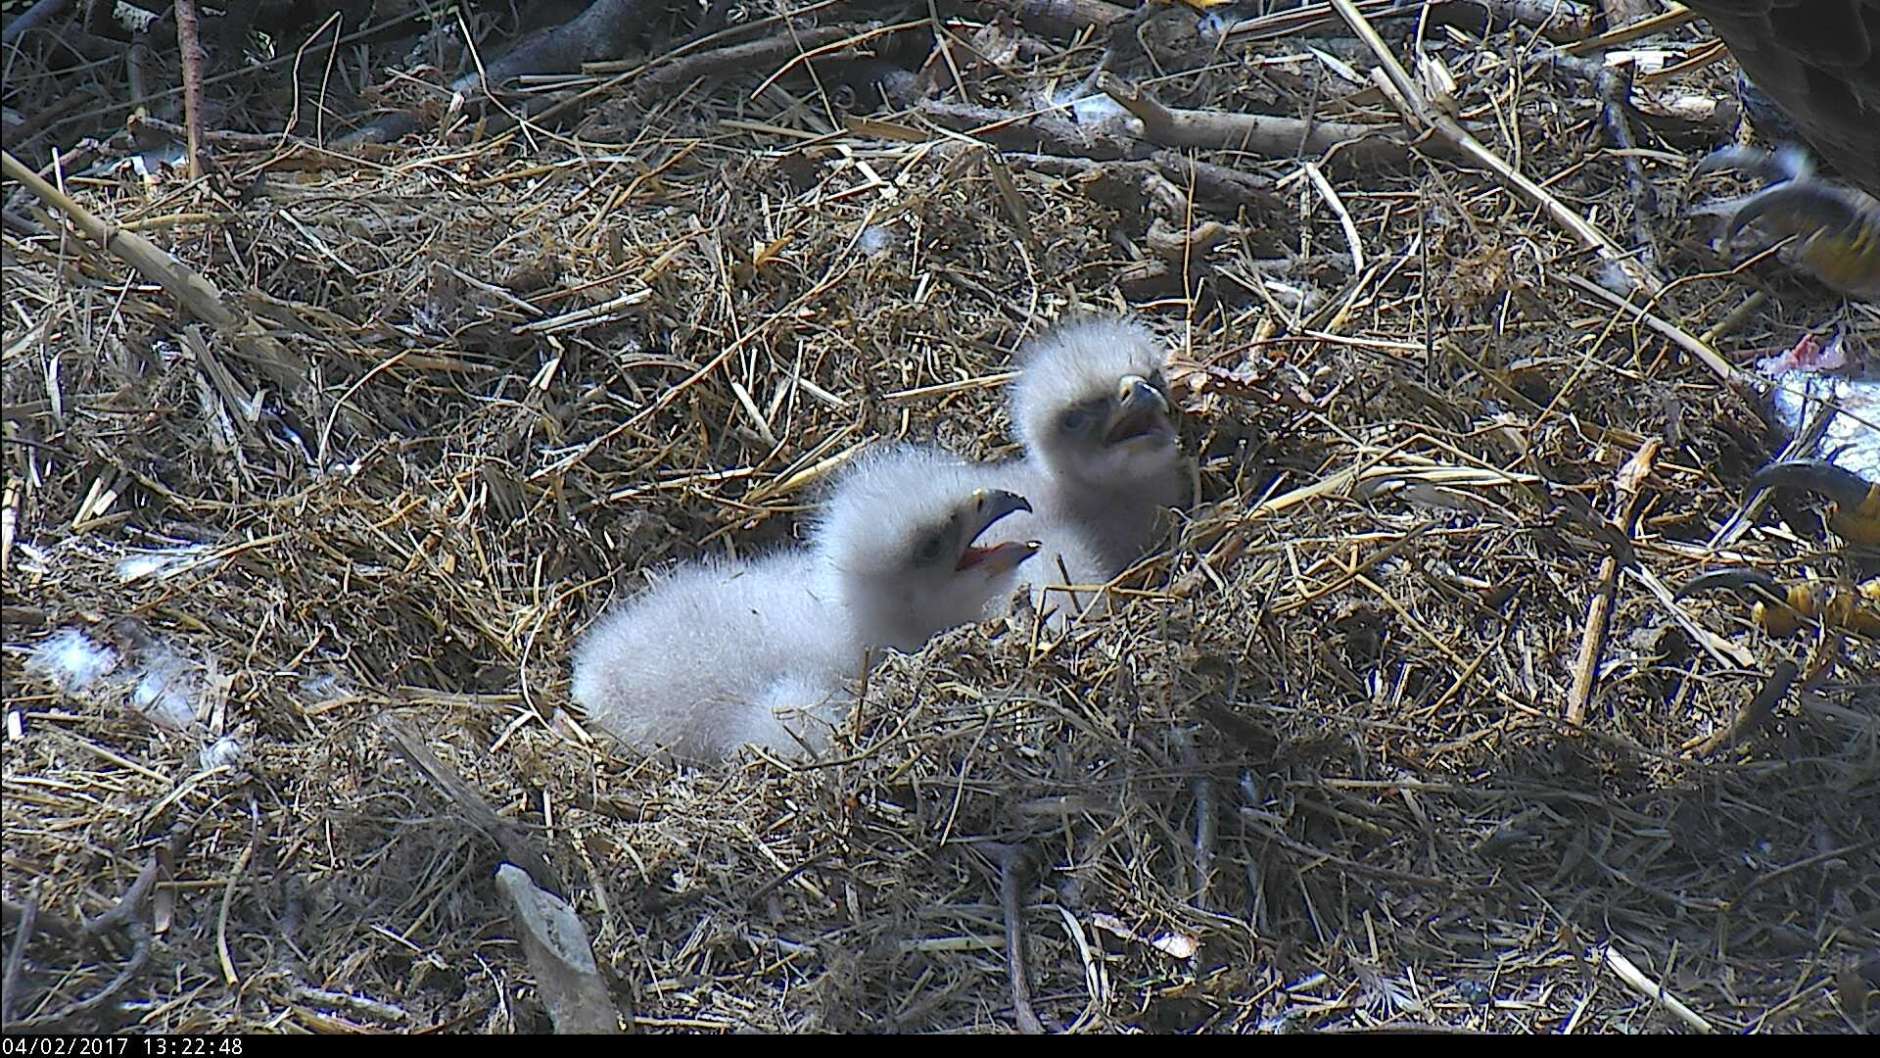 The two eaglets at the National Arboretum. (© 2017 American Eagle Foundation, DCEAGLECAM.ORG)